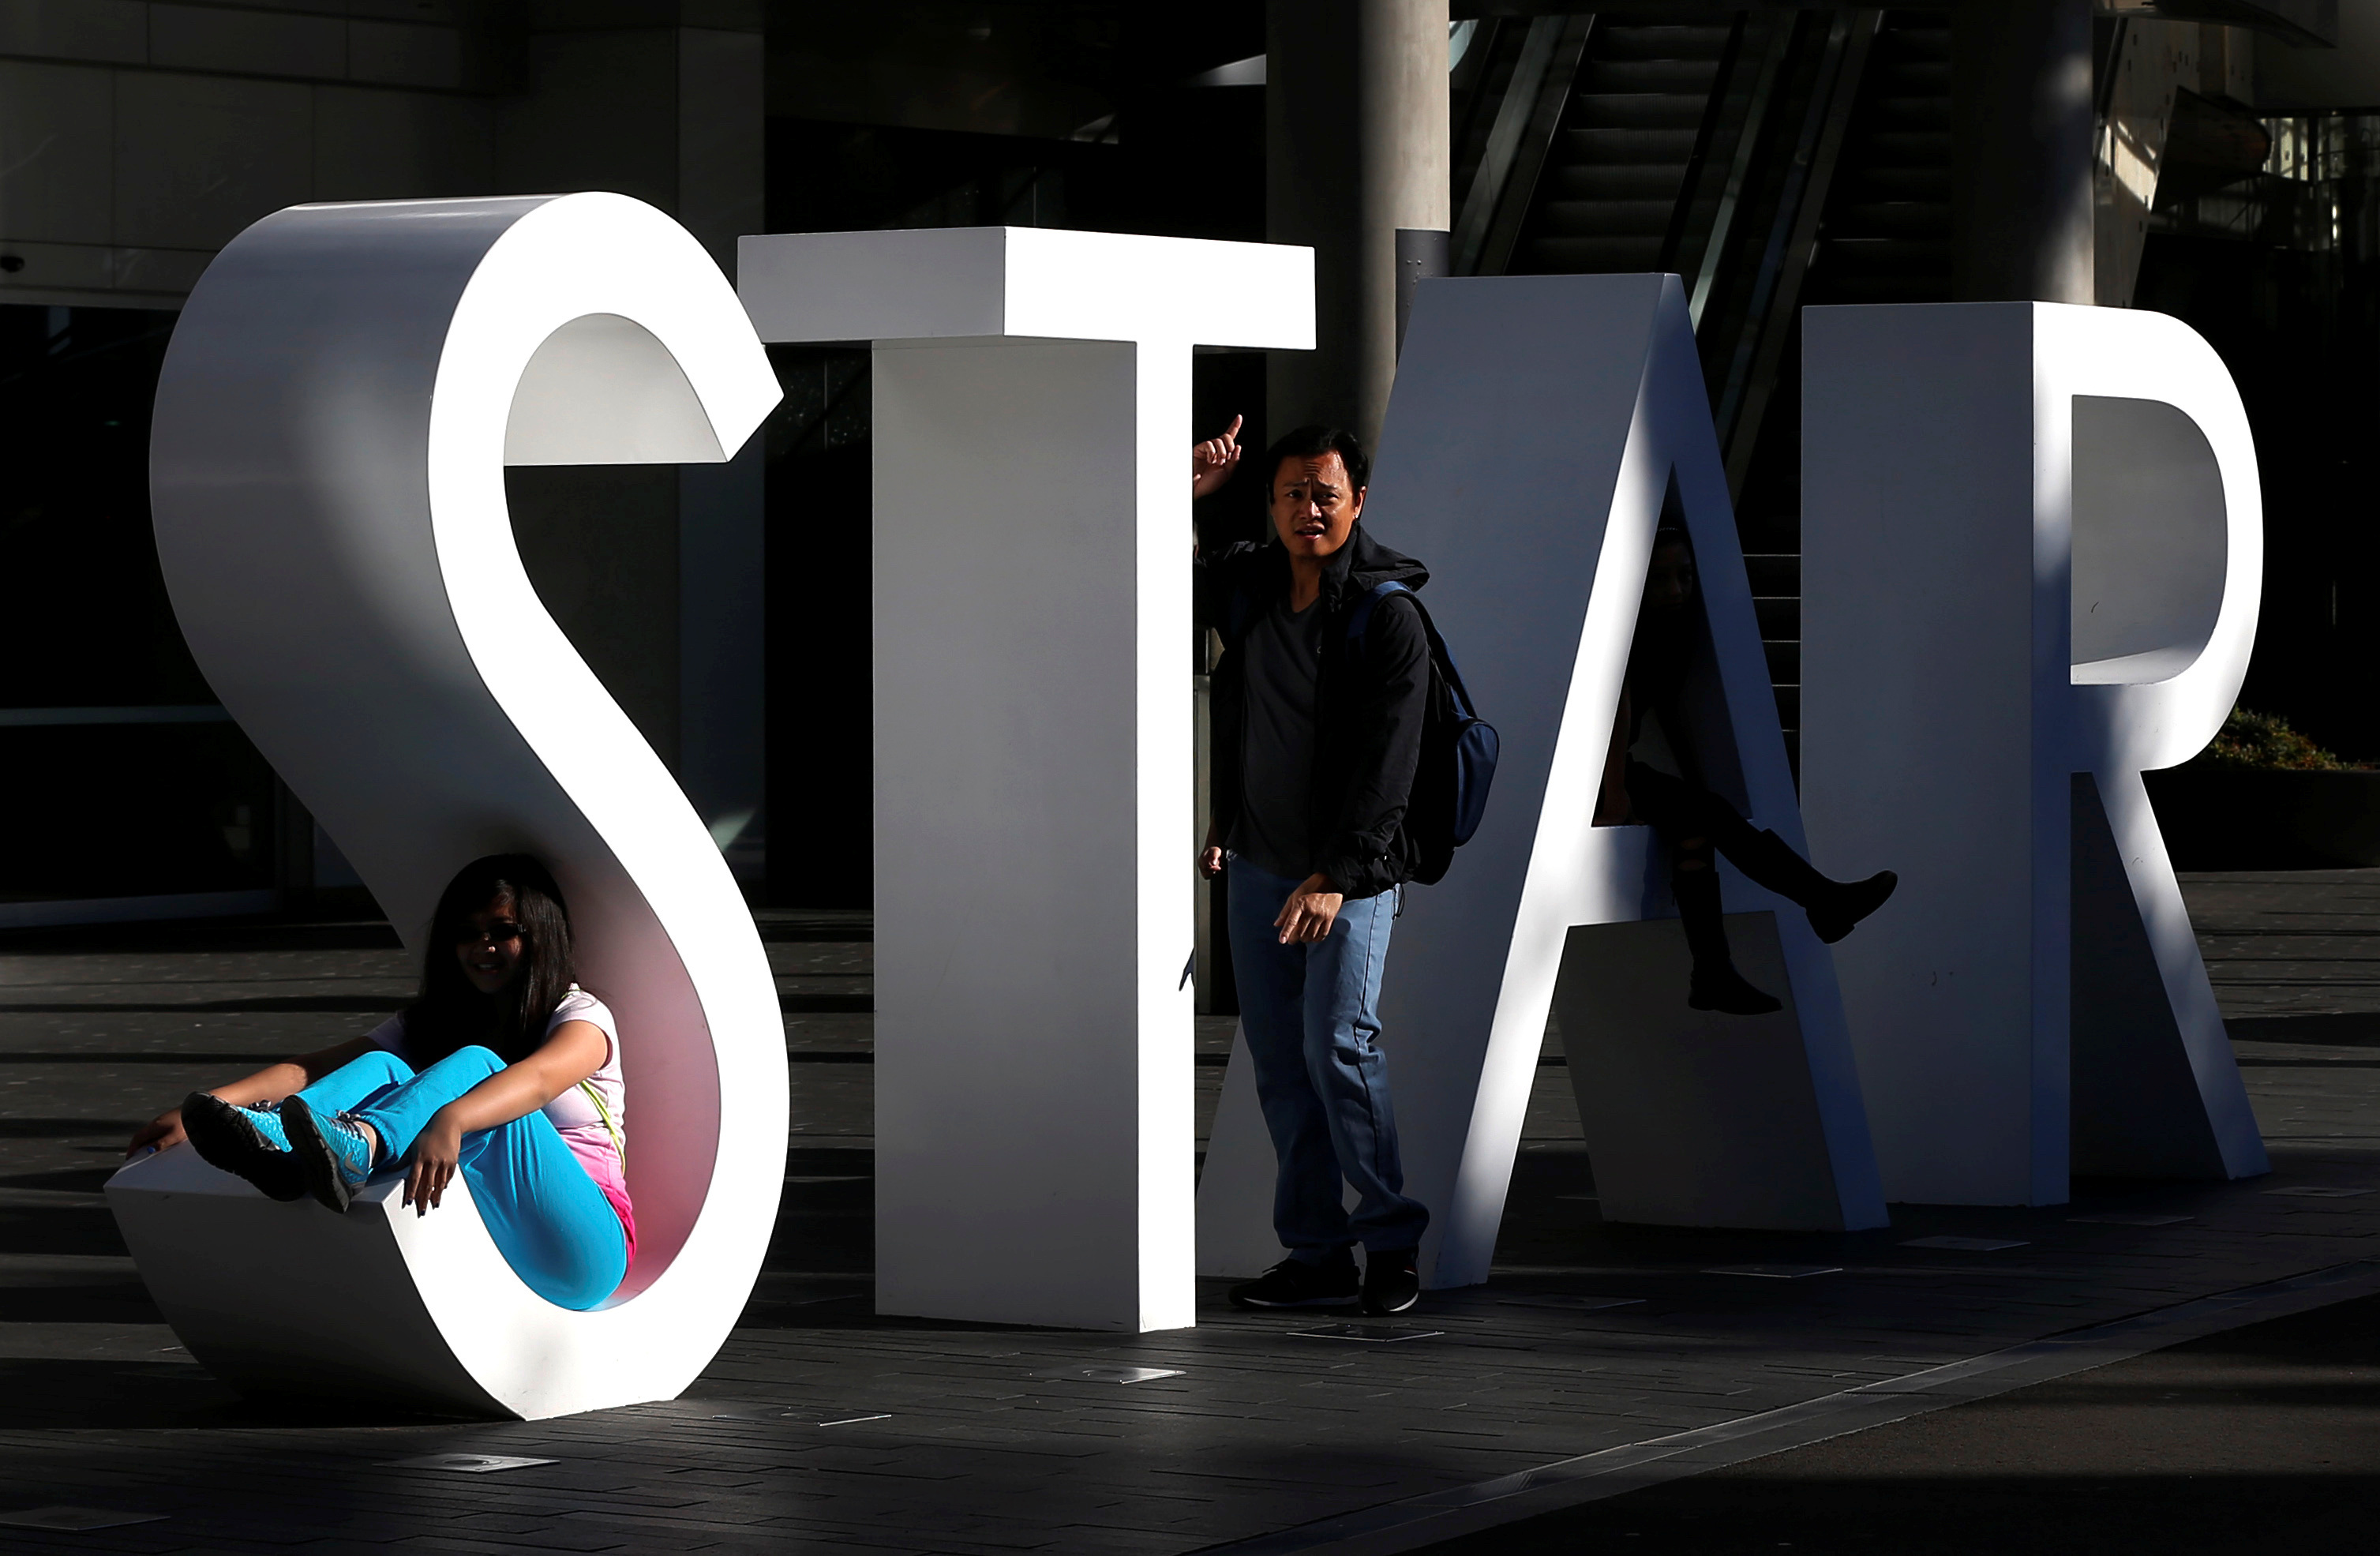 File photo of tourists posing for pictures at the main sign of The Star Casino at Pyrmont Bay in Sydney